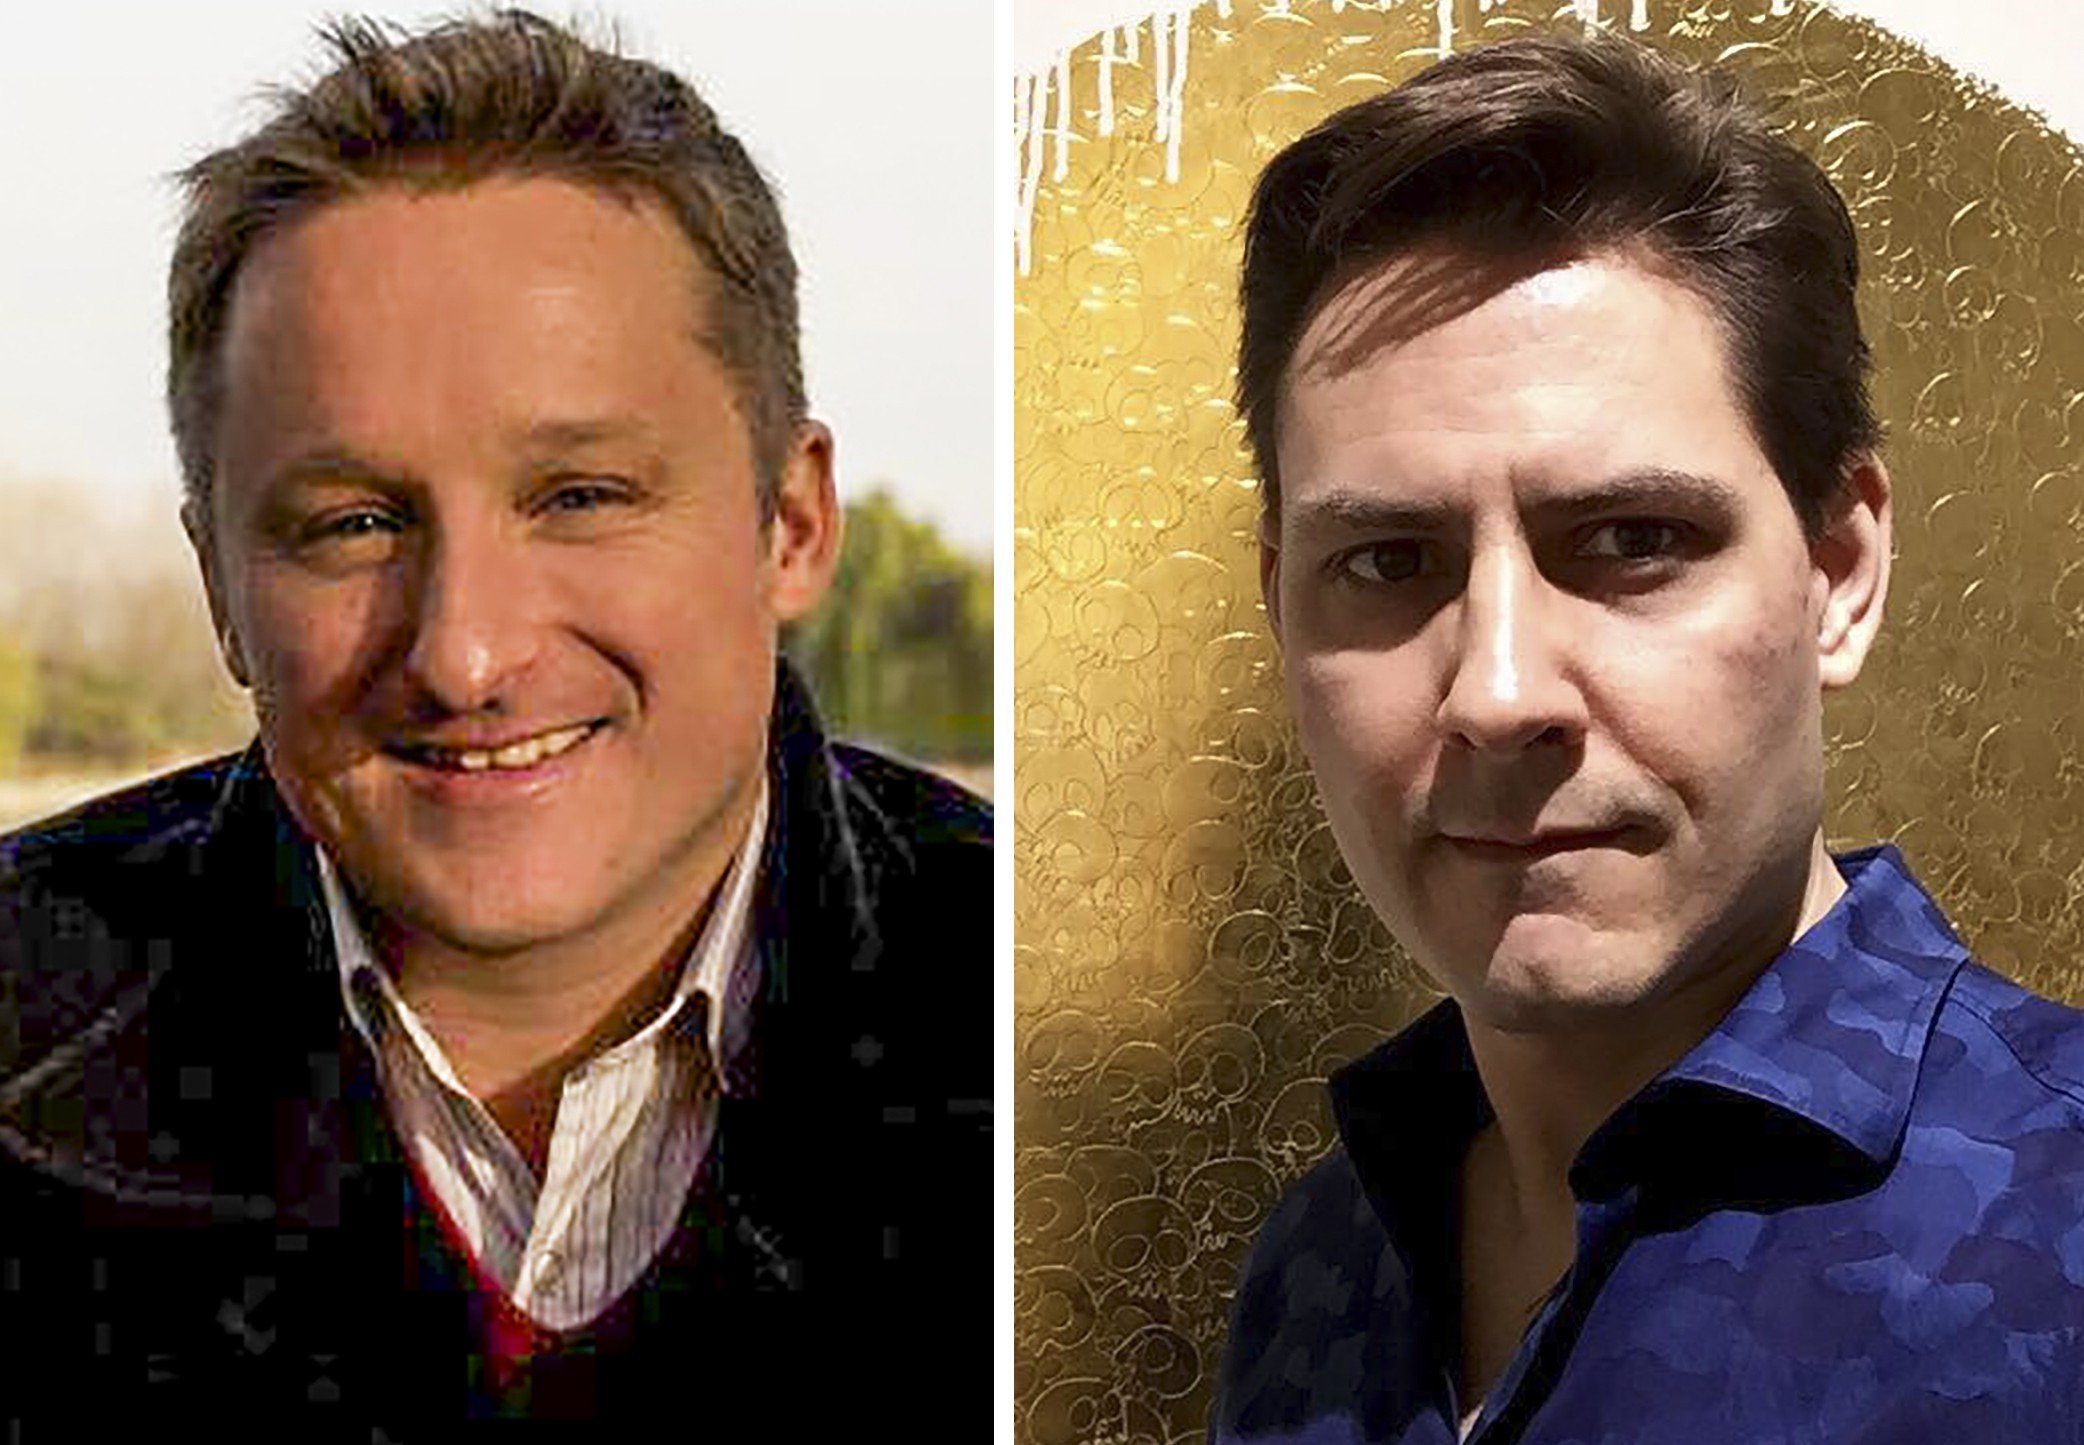 Canadians Michael Spavor and Michael Kovrig have been held for more than 100 days without charge in China. Photo: Facebook